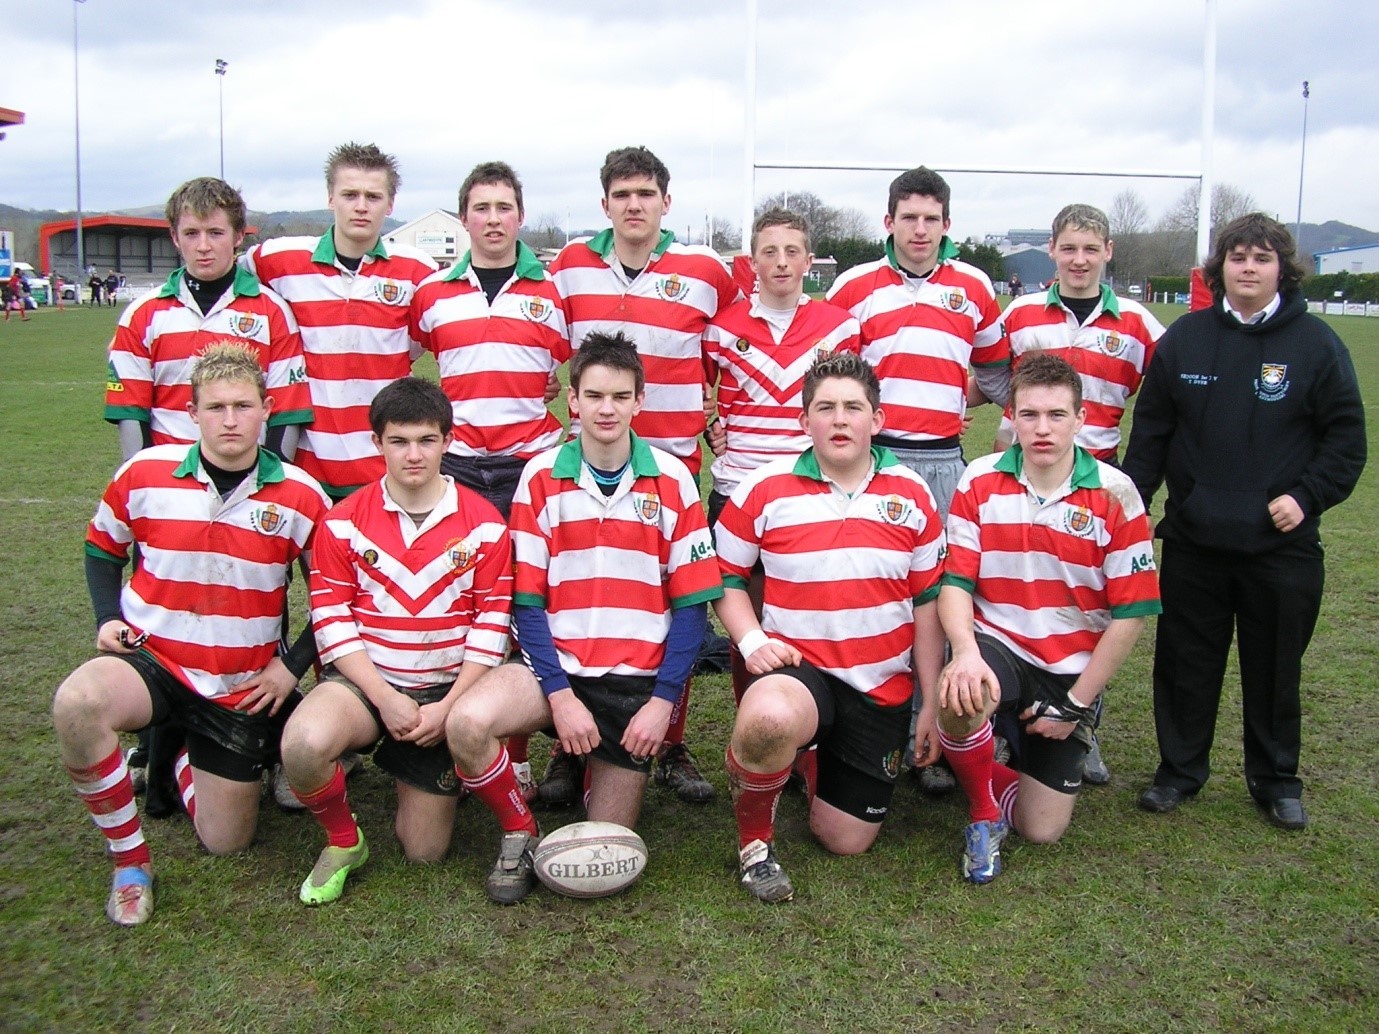 Wyn Jones front row first from right representing Ysgol Pantycelyn at the Llandovery 7s as a 16 year old